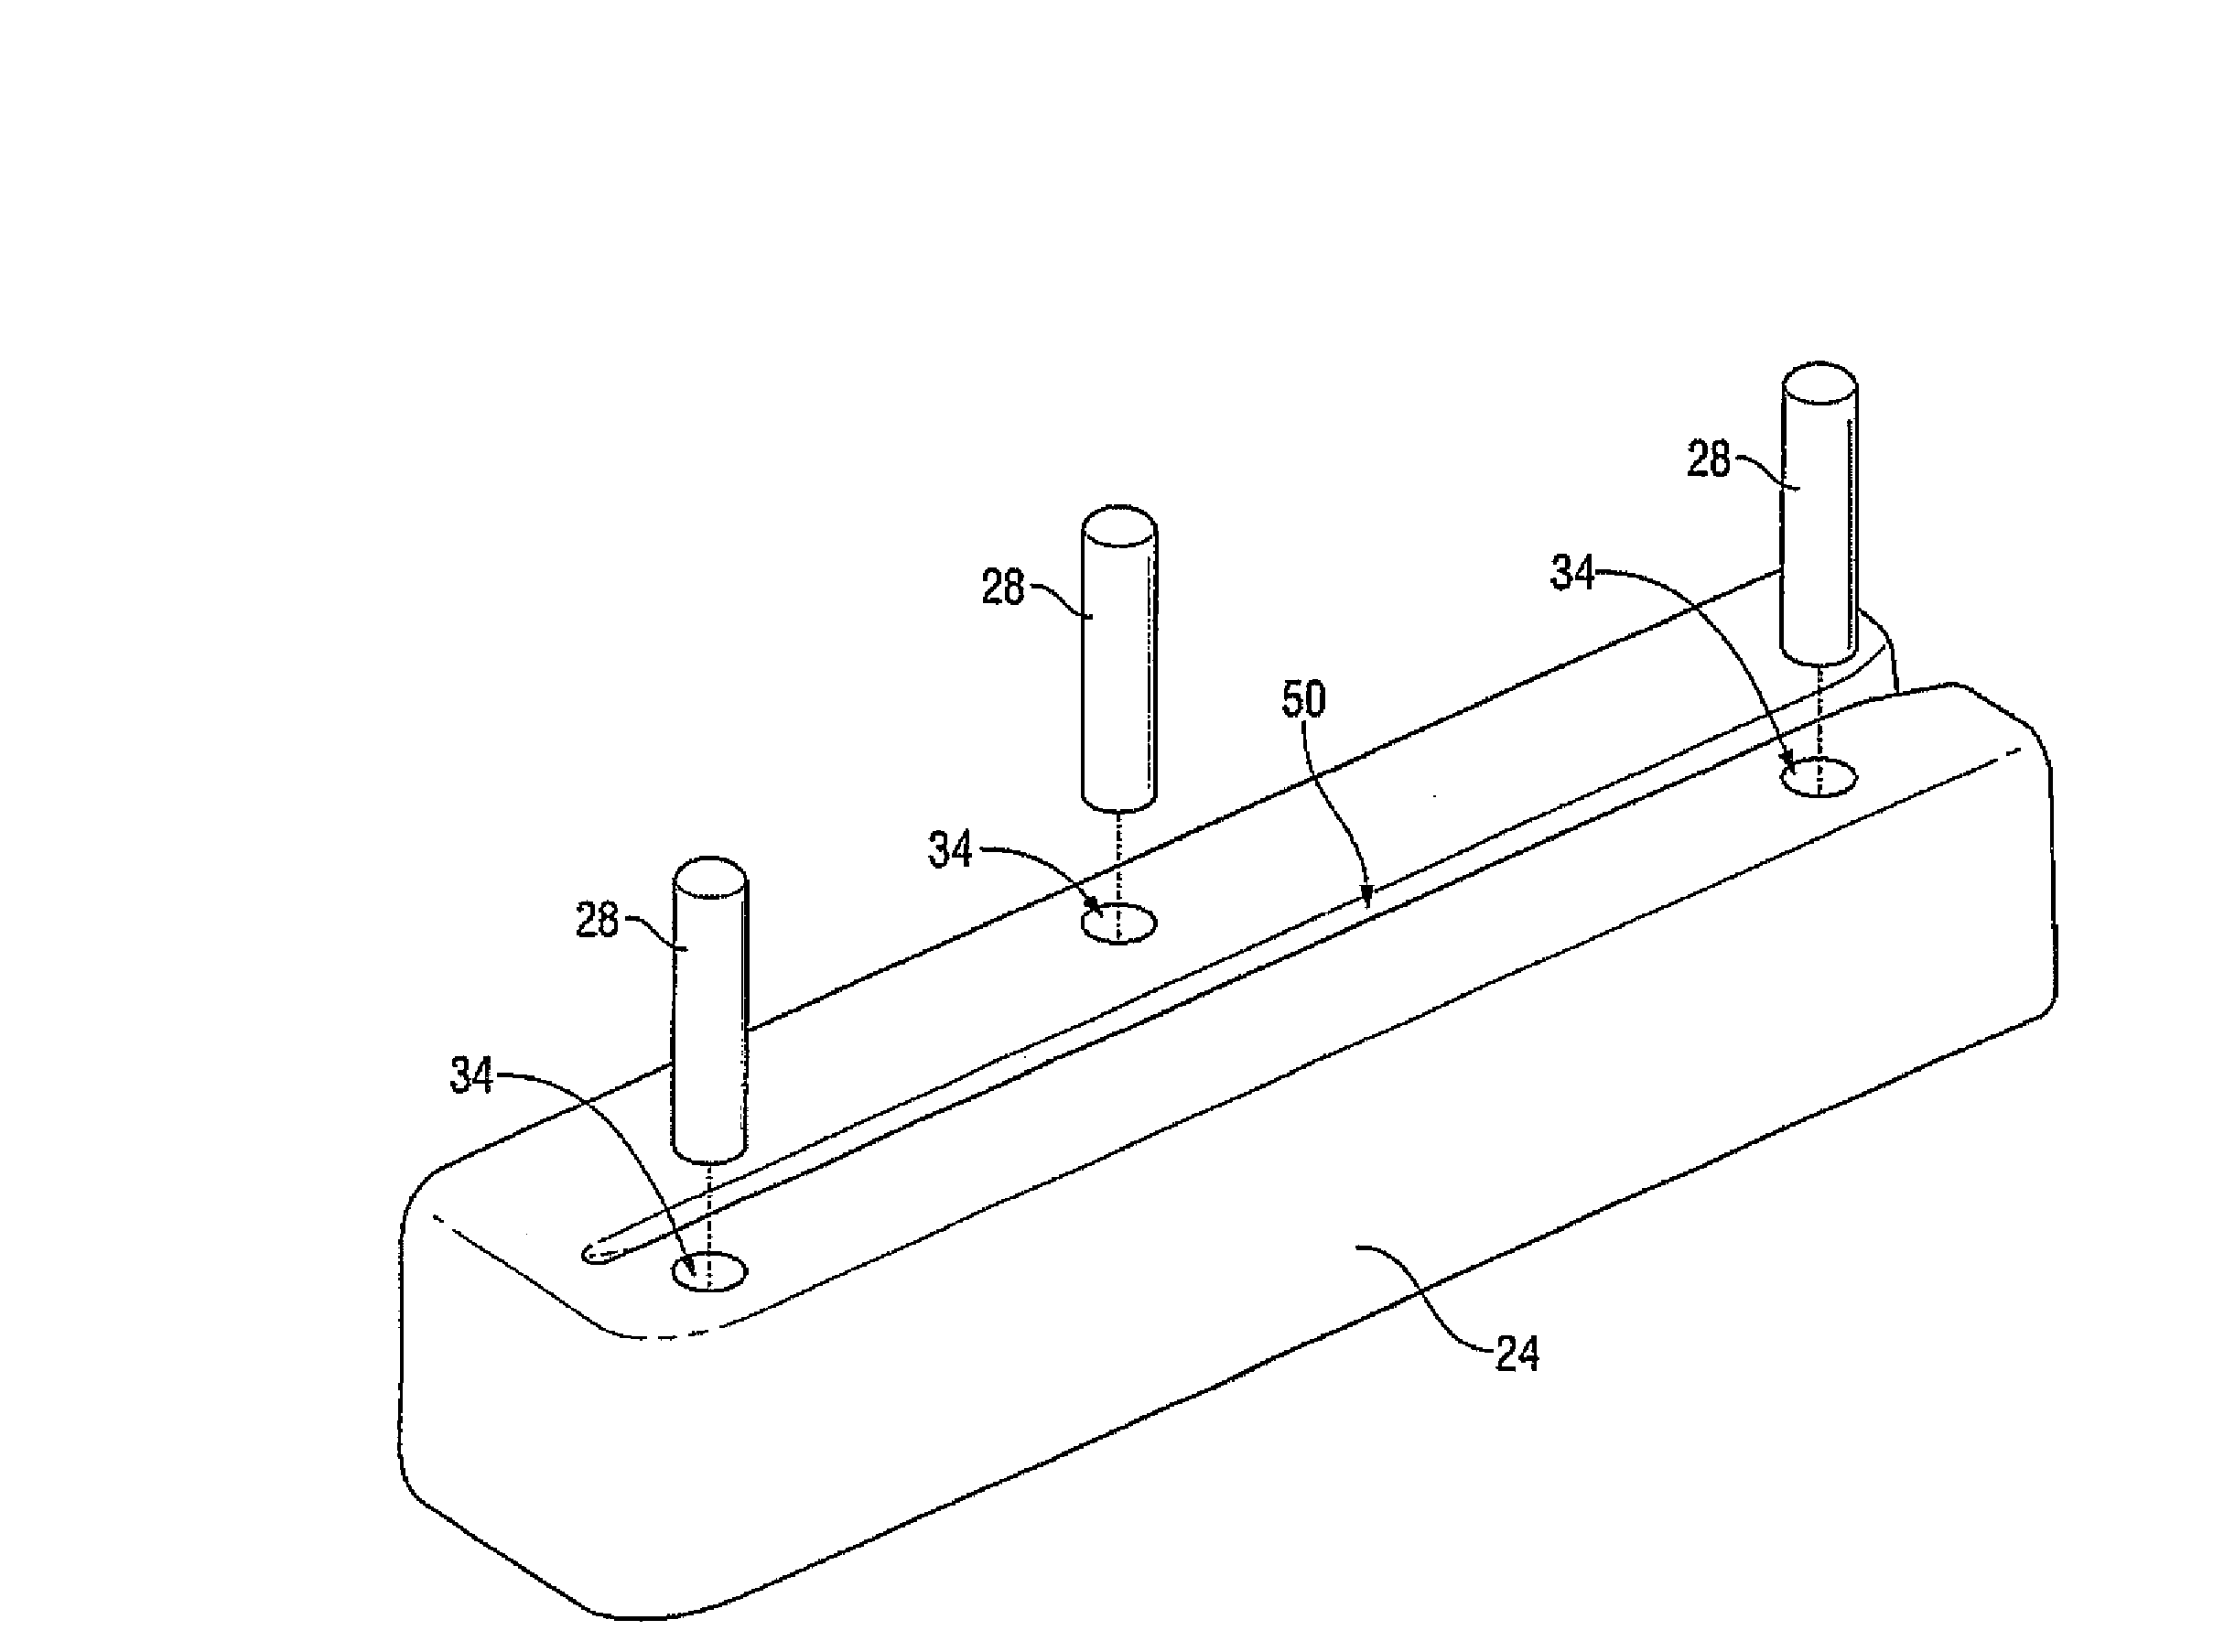 Method For Securing A Stop Member To A Seal Plate Configured For Use With An Electrosurgical Instrument